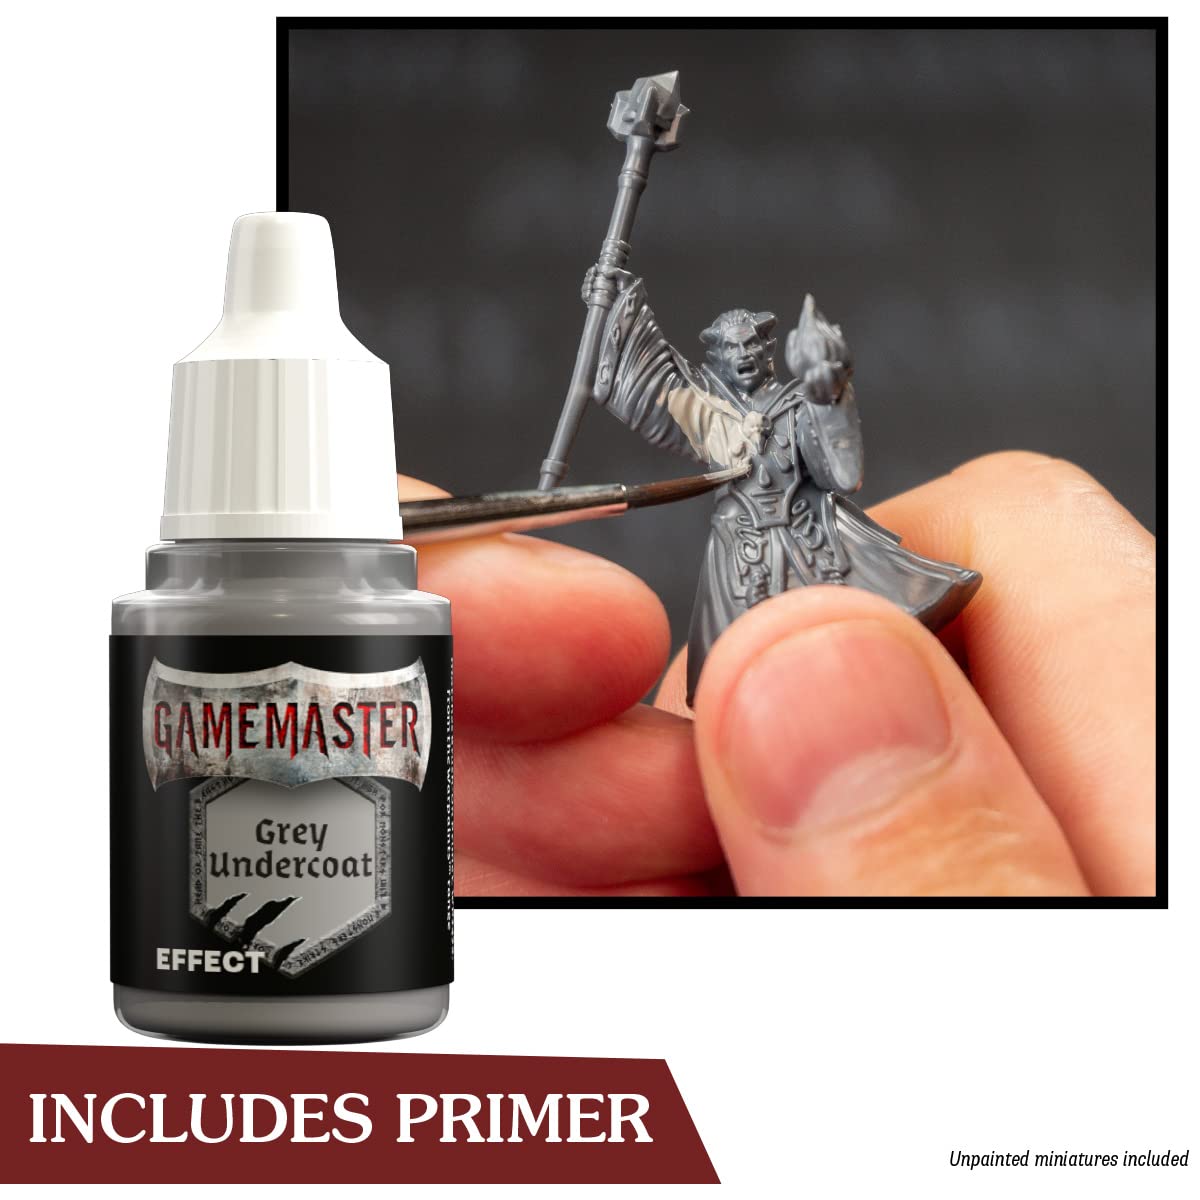 The Army Painter GameMaster Character Starter Role-playing Set - Zippigames